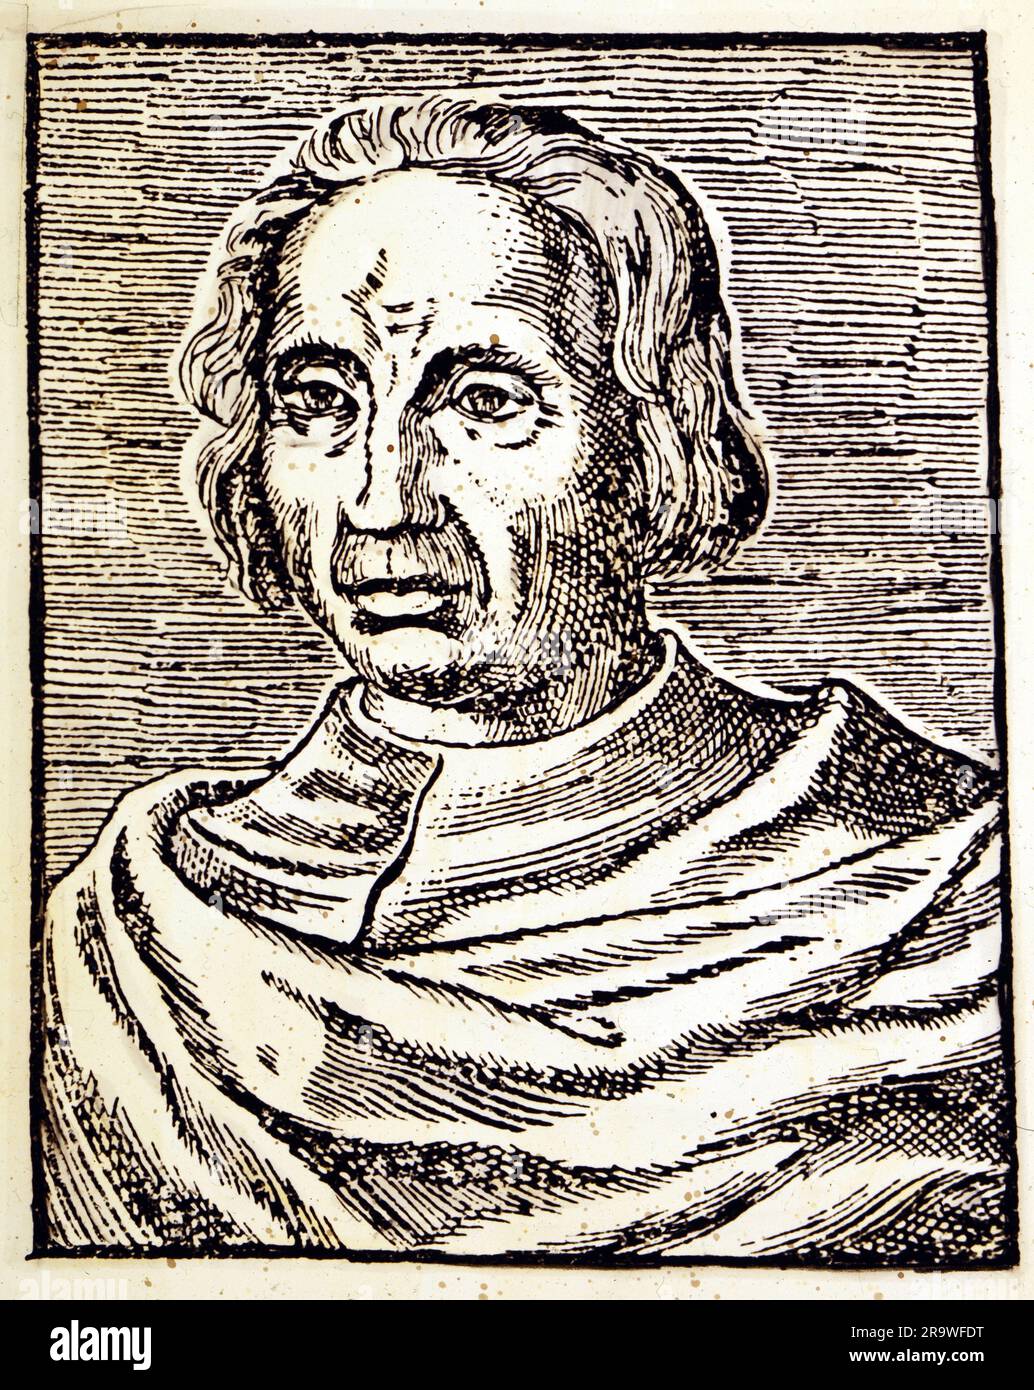 Columbus, Christopher, 1451 - 20.5.1506, Italian navigator and discoverer, portrait, woodcut, ADDITIONAL-RIGHTS-CLEARANCE-INFO-NOT-AVAILABLE Stock Photo